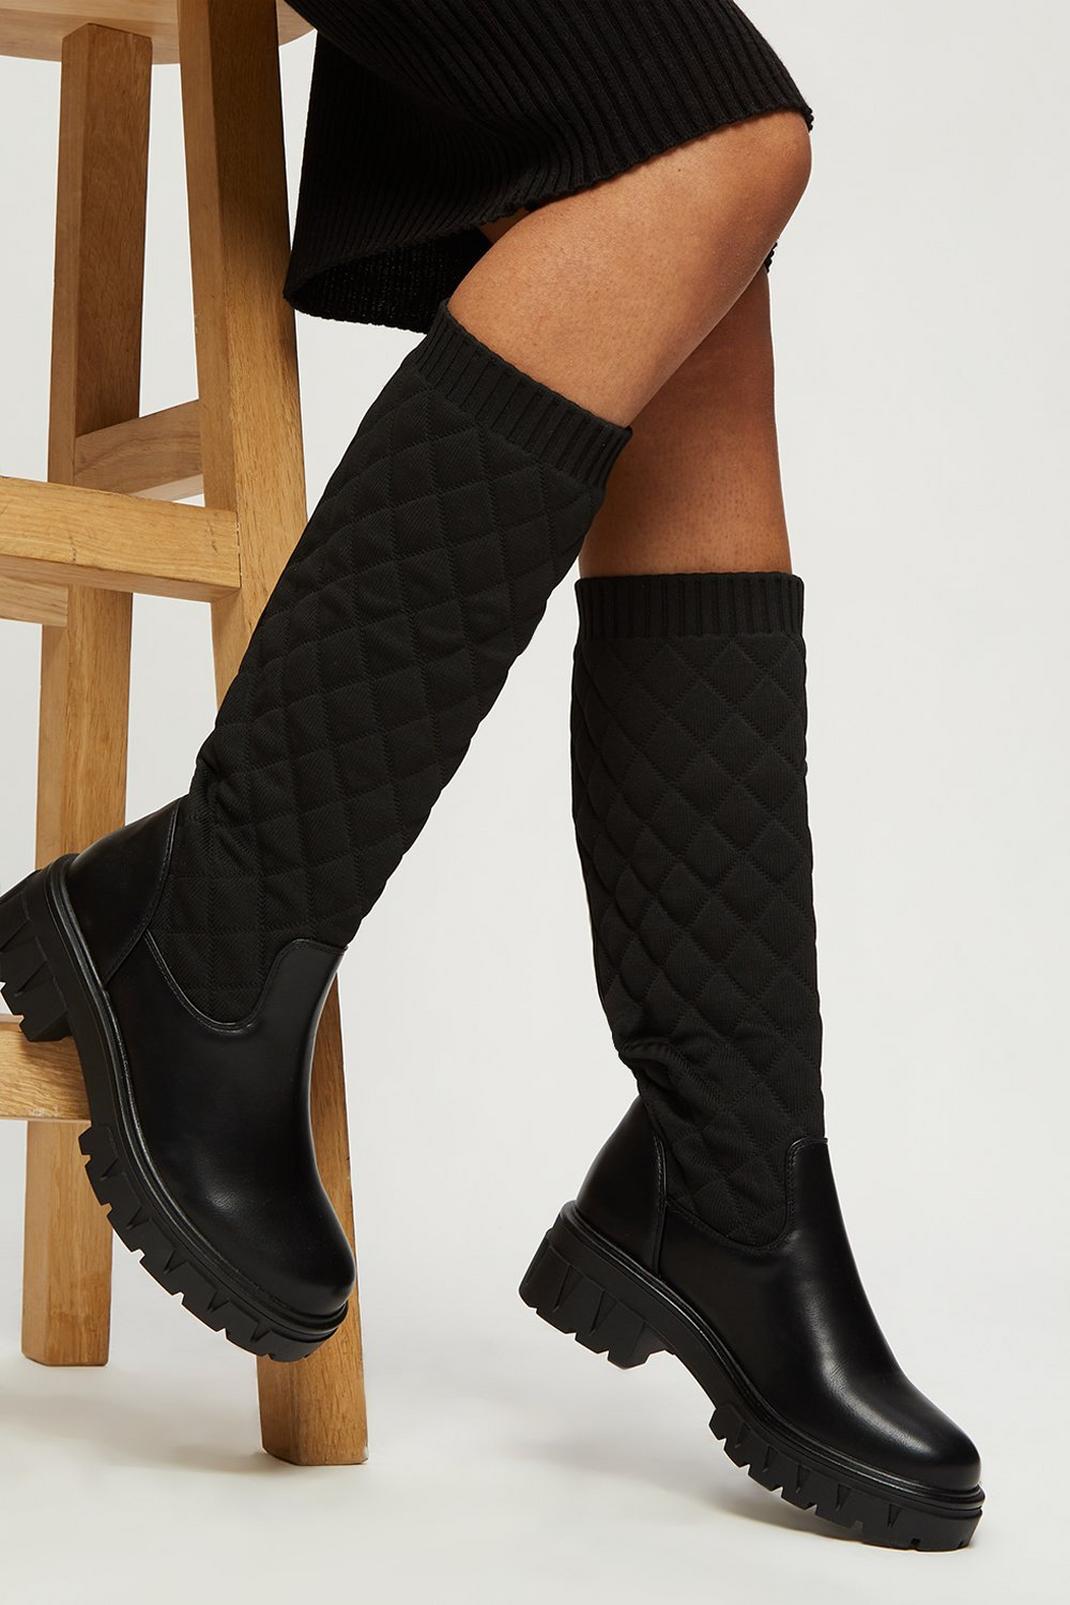 Black Tori Quilted High Leg Boots image number 1